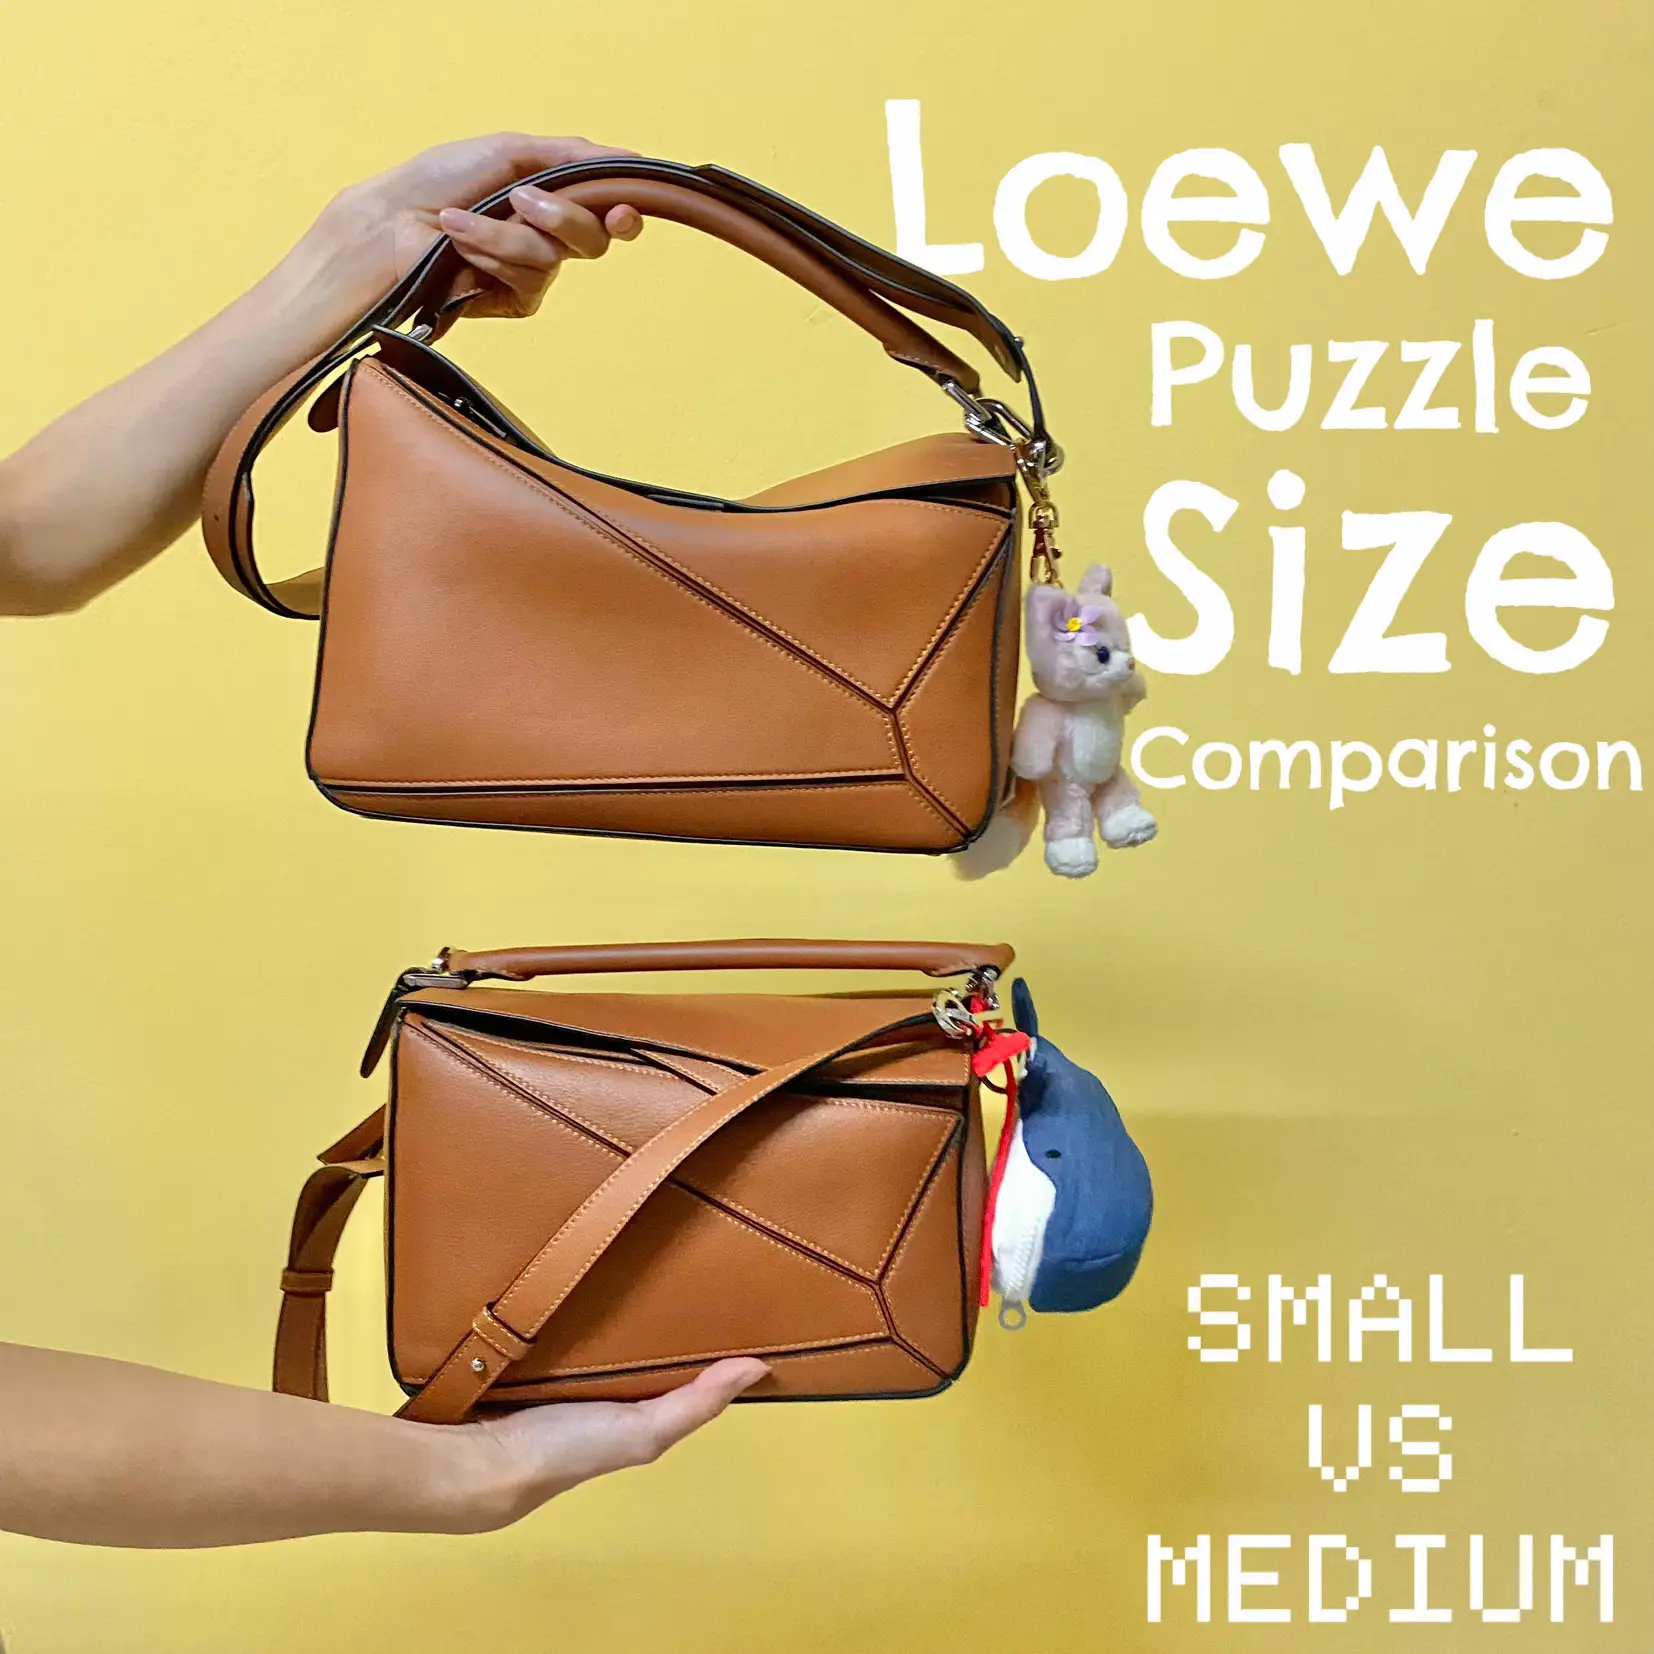 LOEWE - A trio of Puzzle bags: from small, to mini, to our newest